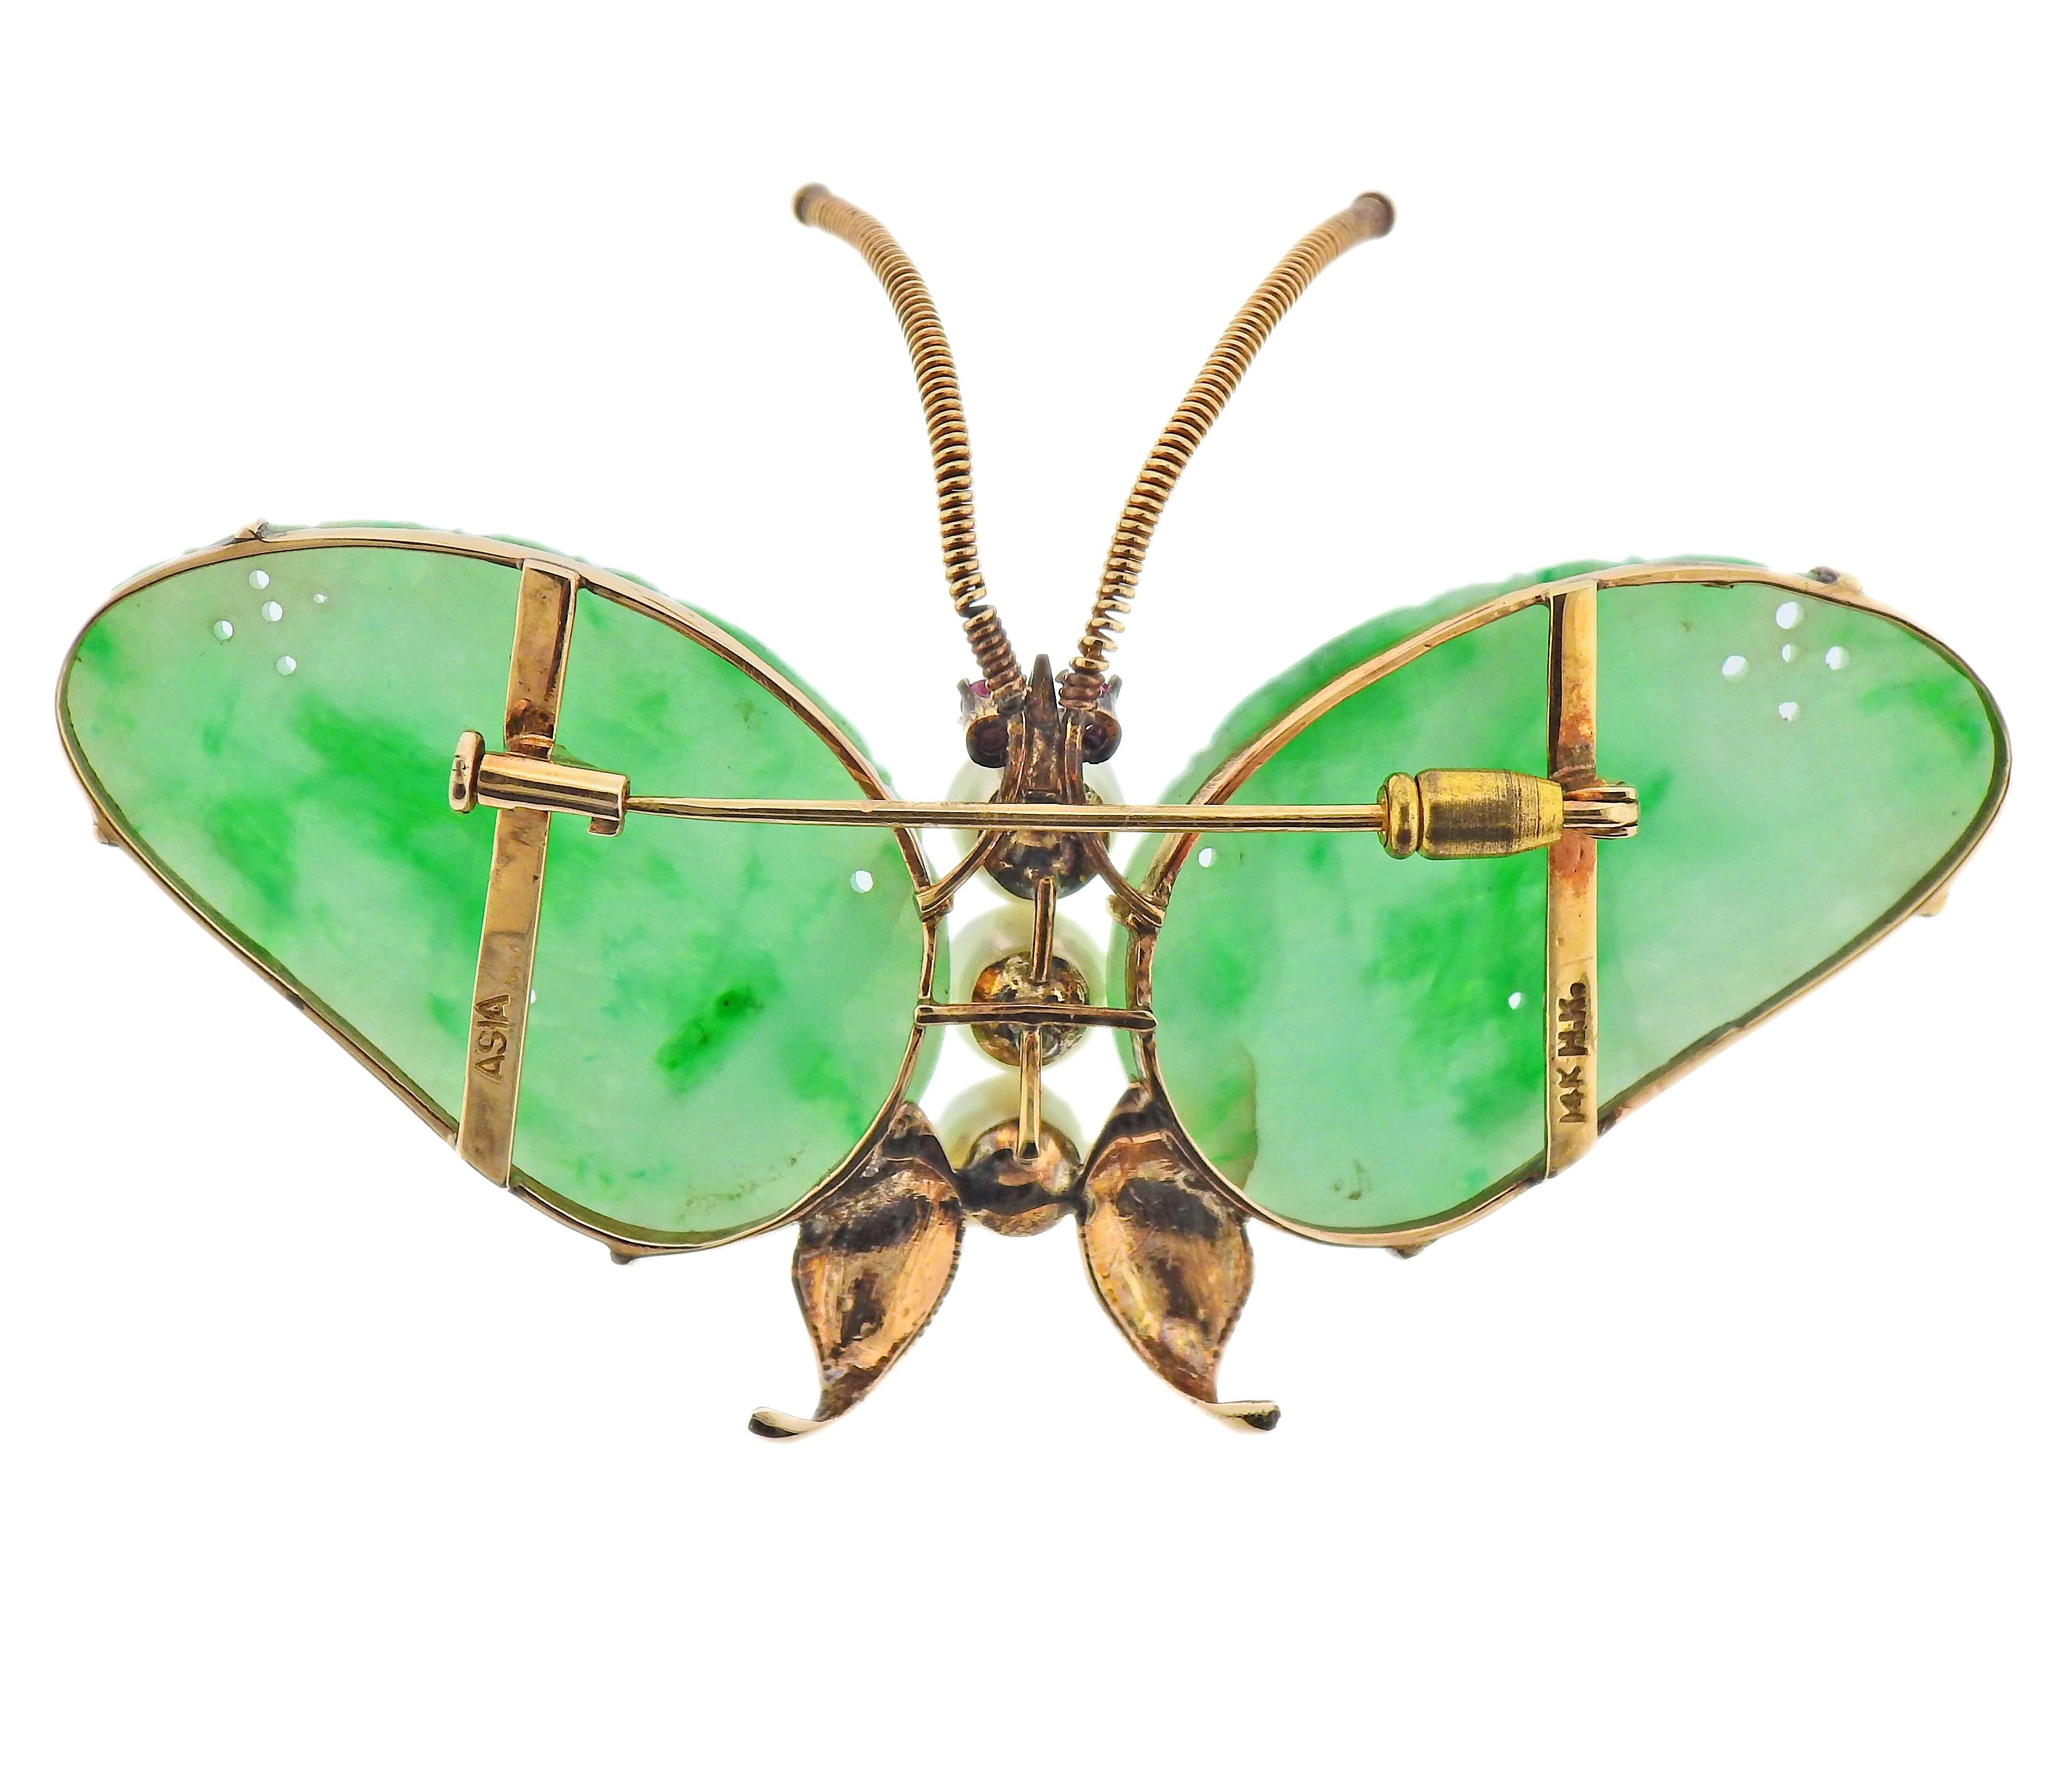 14k gold vintage butterfly brooch, with carved jade wings, 6.3 - 6.5mm pearls and ruby eyes. Brooch measures 2.775